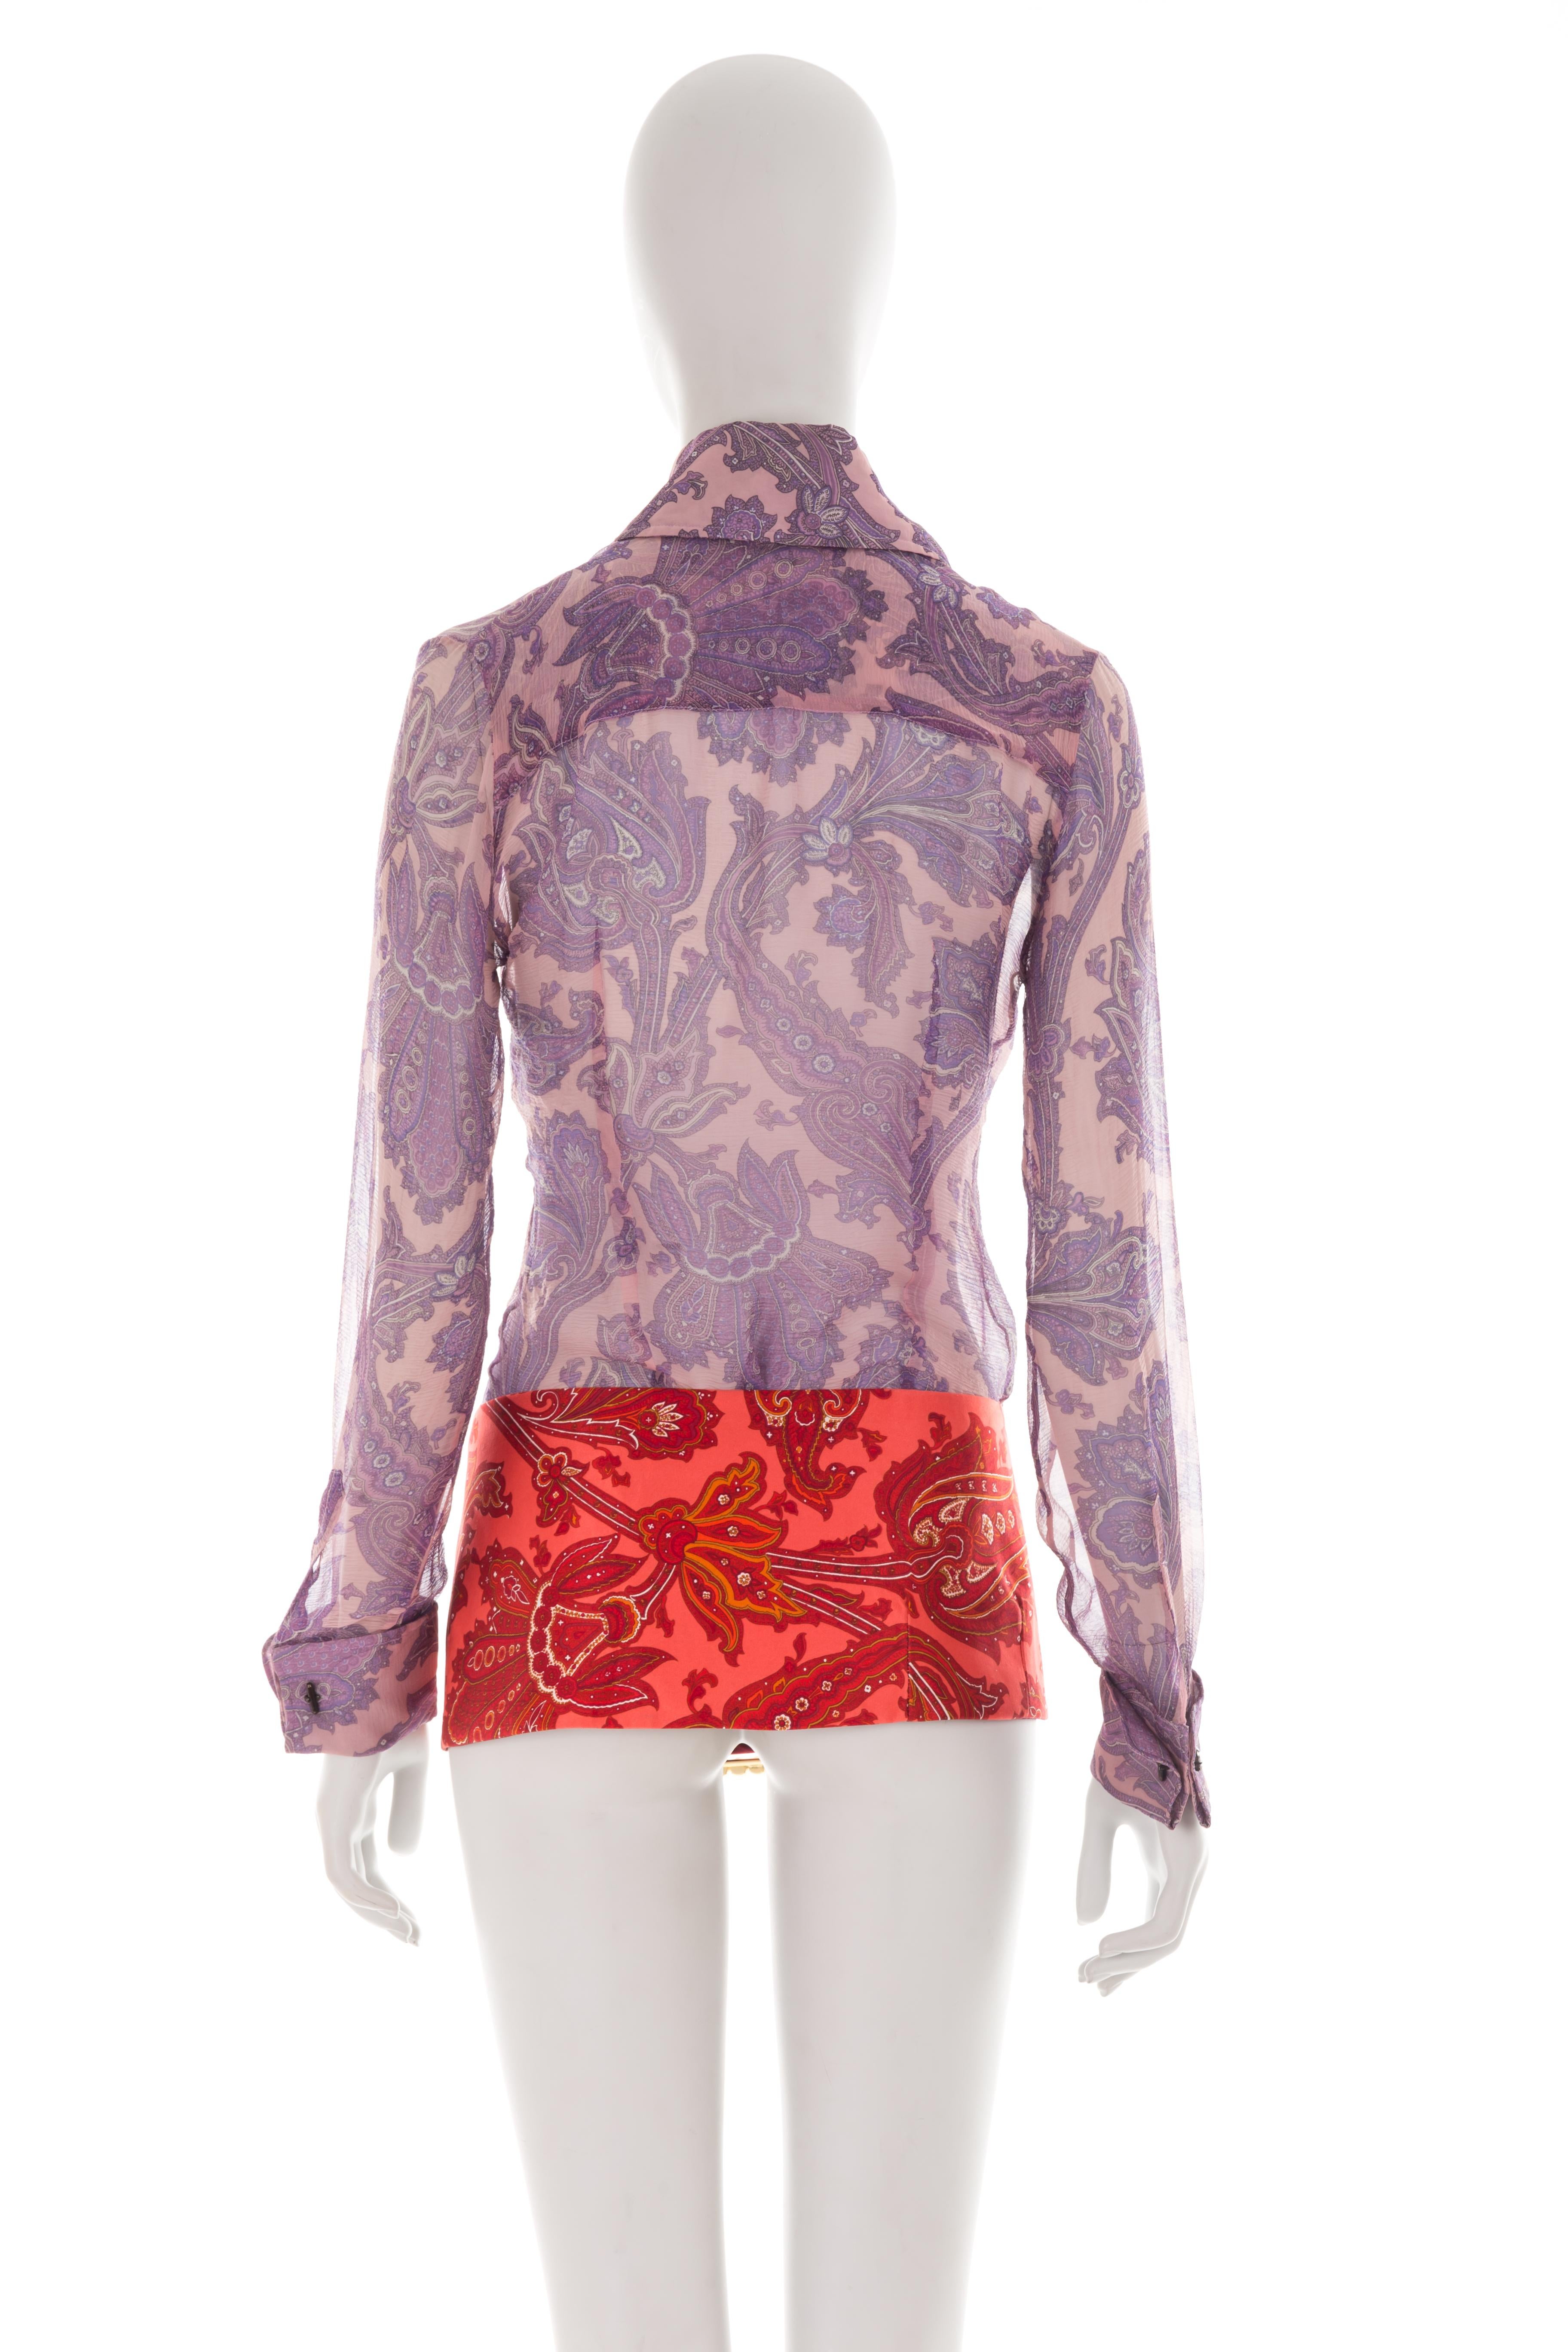 Dolce & Gabbana S/S 2000 silk paisley shirt + micro skirt set In Excellent Condition For Sale In Rome, IT